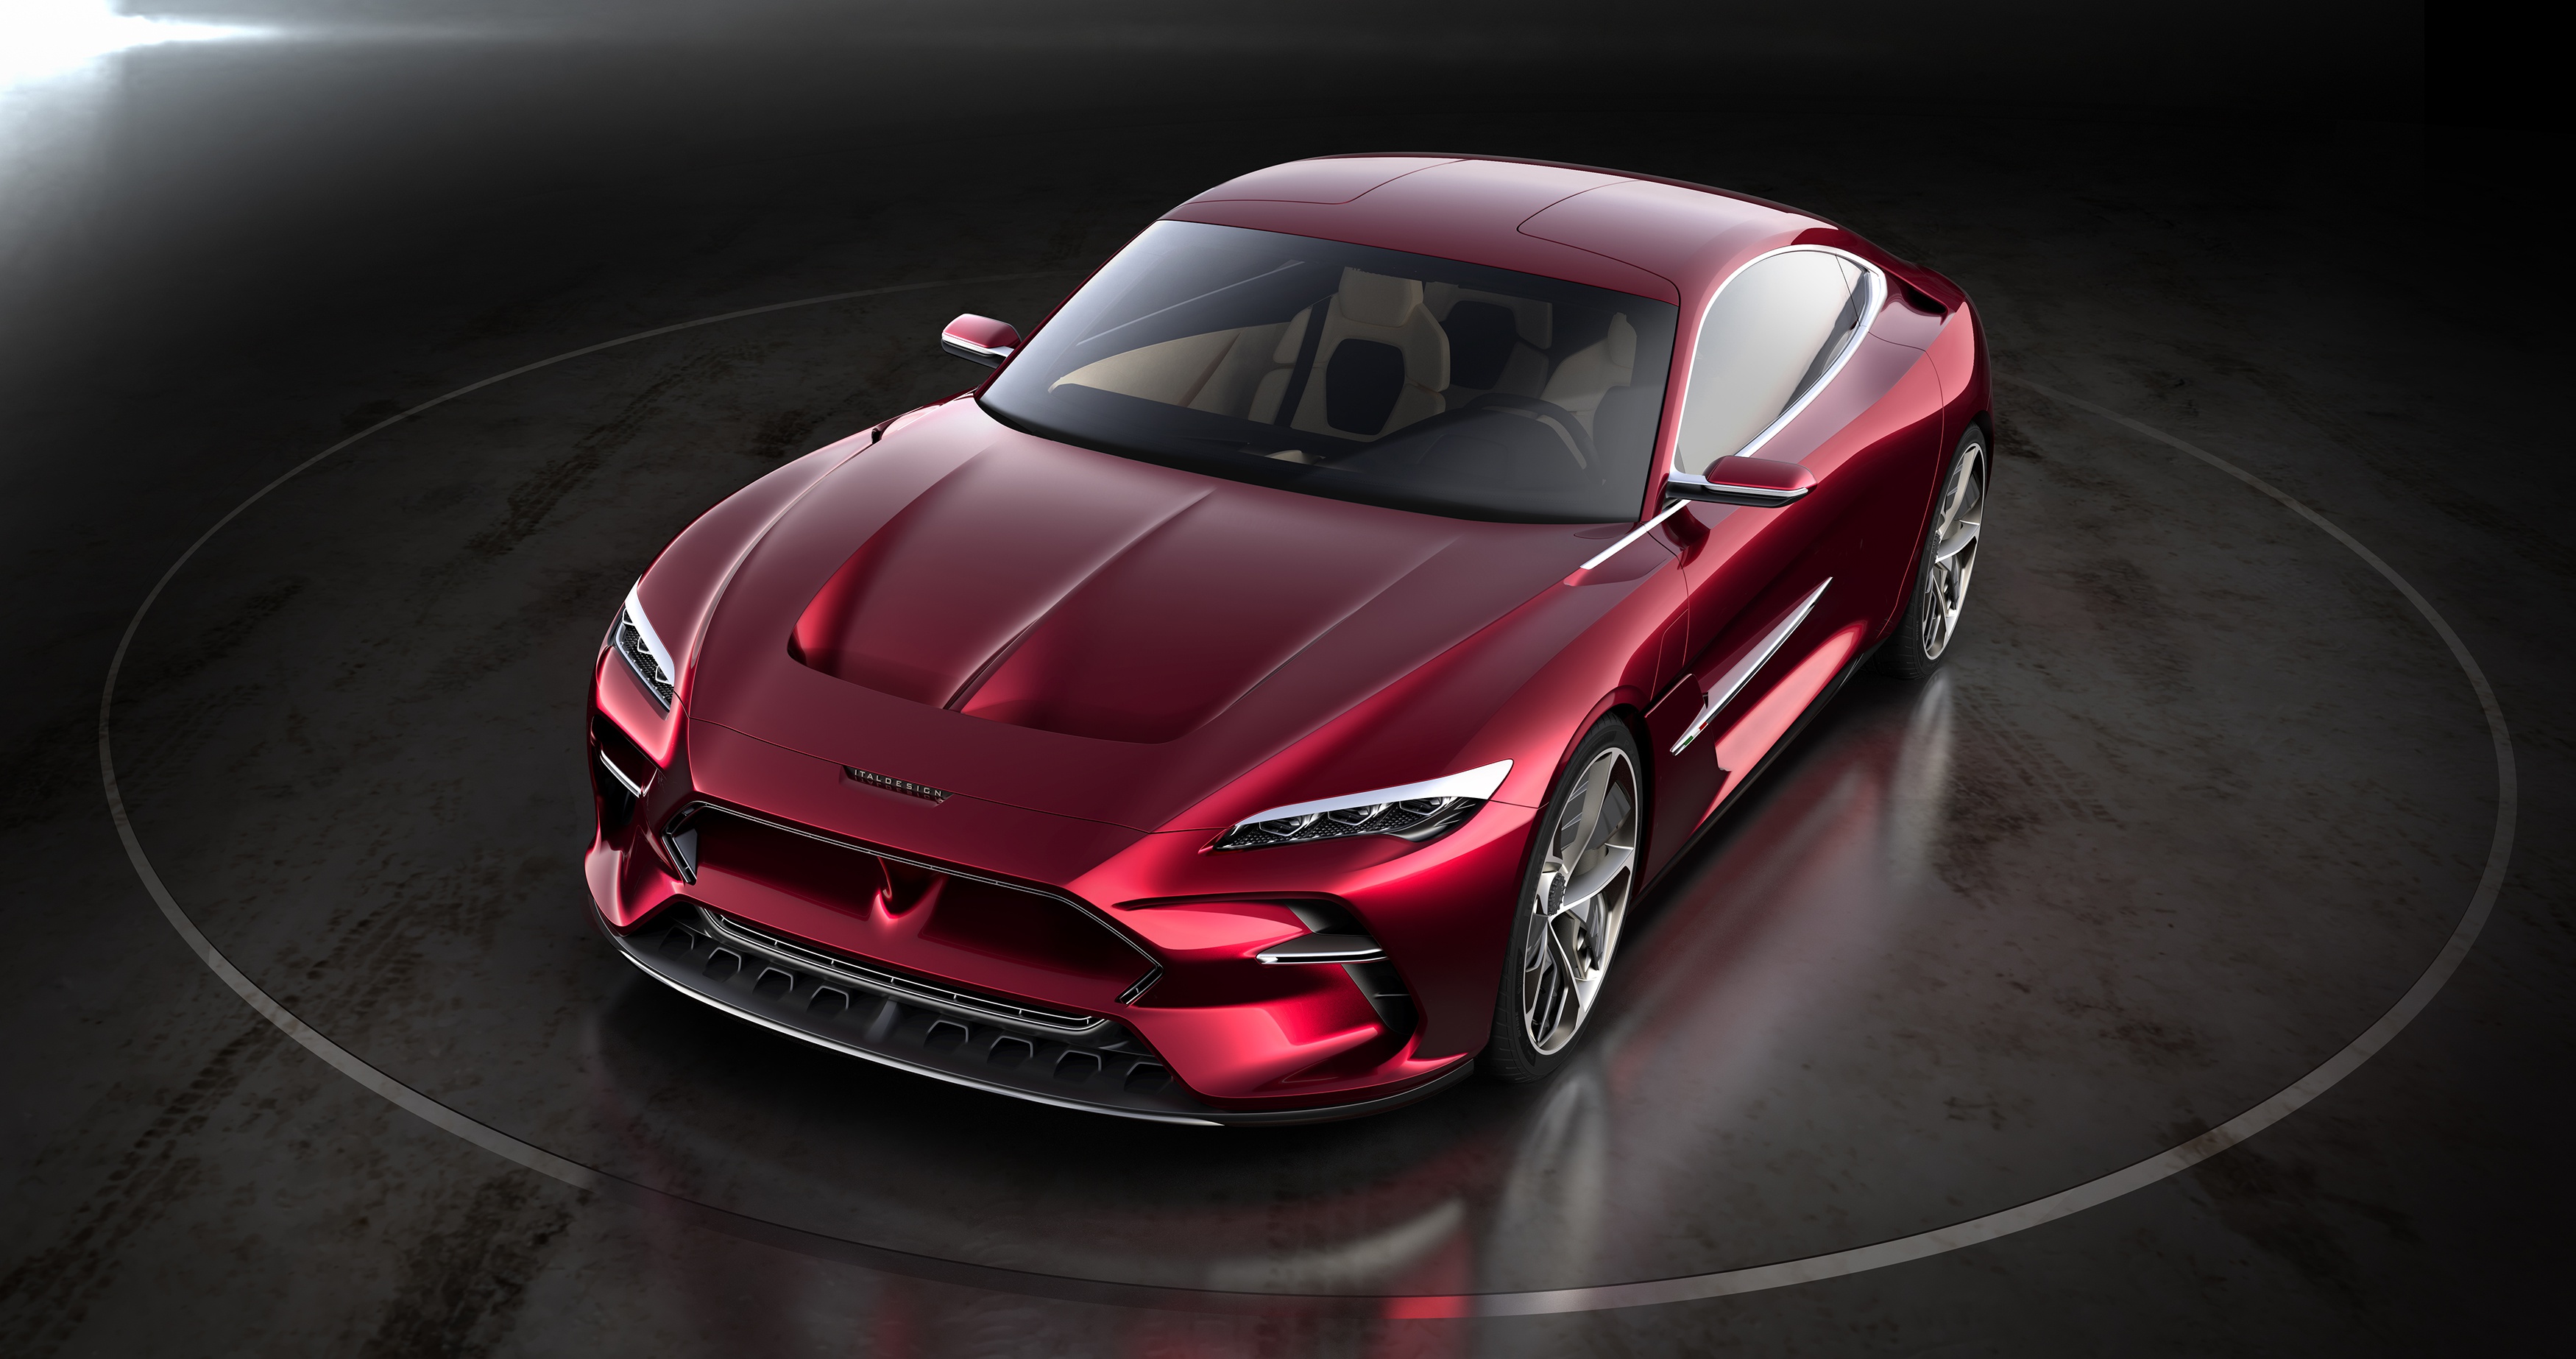 Car Vehicle Italdesign Red Cars Concept Cars 3500x1846